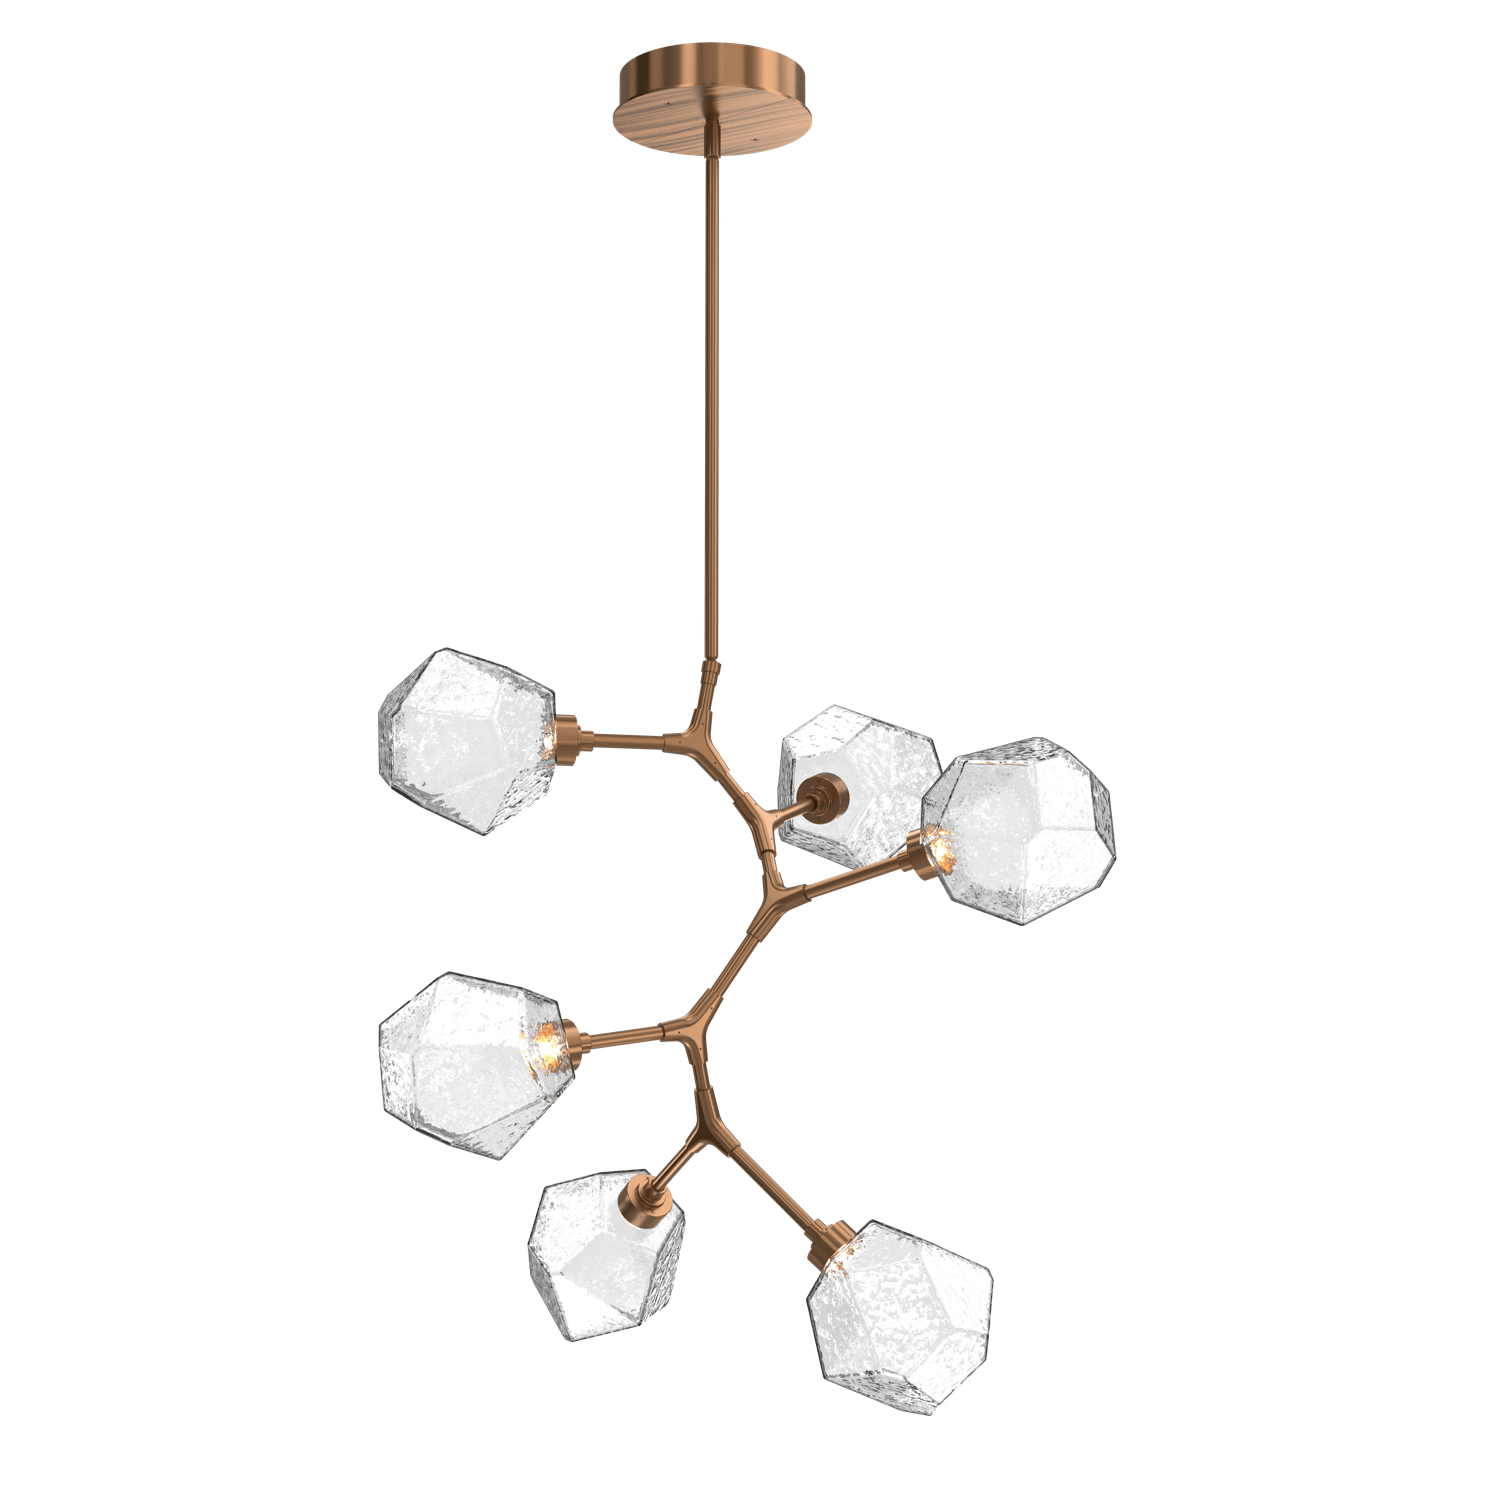 CHB0039-VA-RB-C-Hammerton-Studio-Gem-6-light-modern-vine-chandelier-with-oil-rubbed-bronze-finish-and-clear-blown-glass-shades-and-LED-lamping